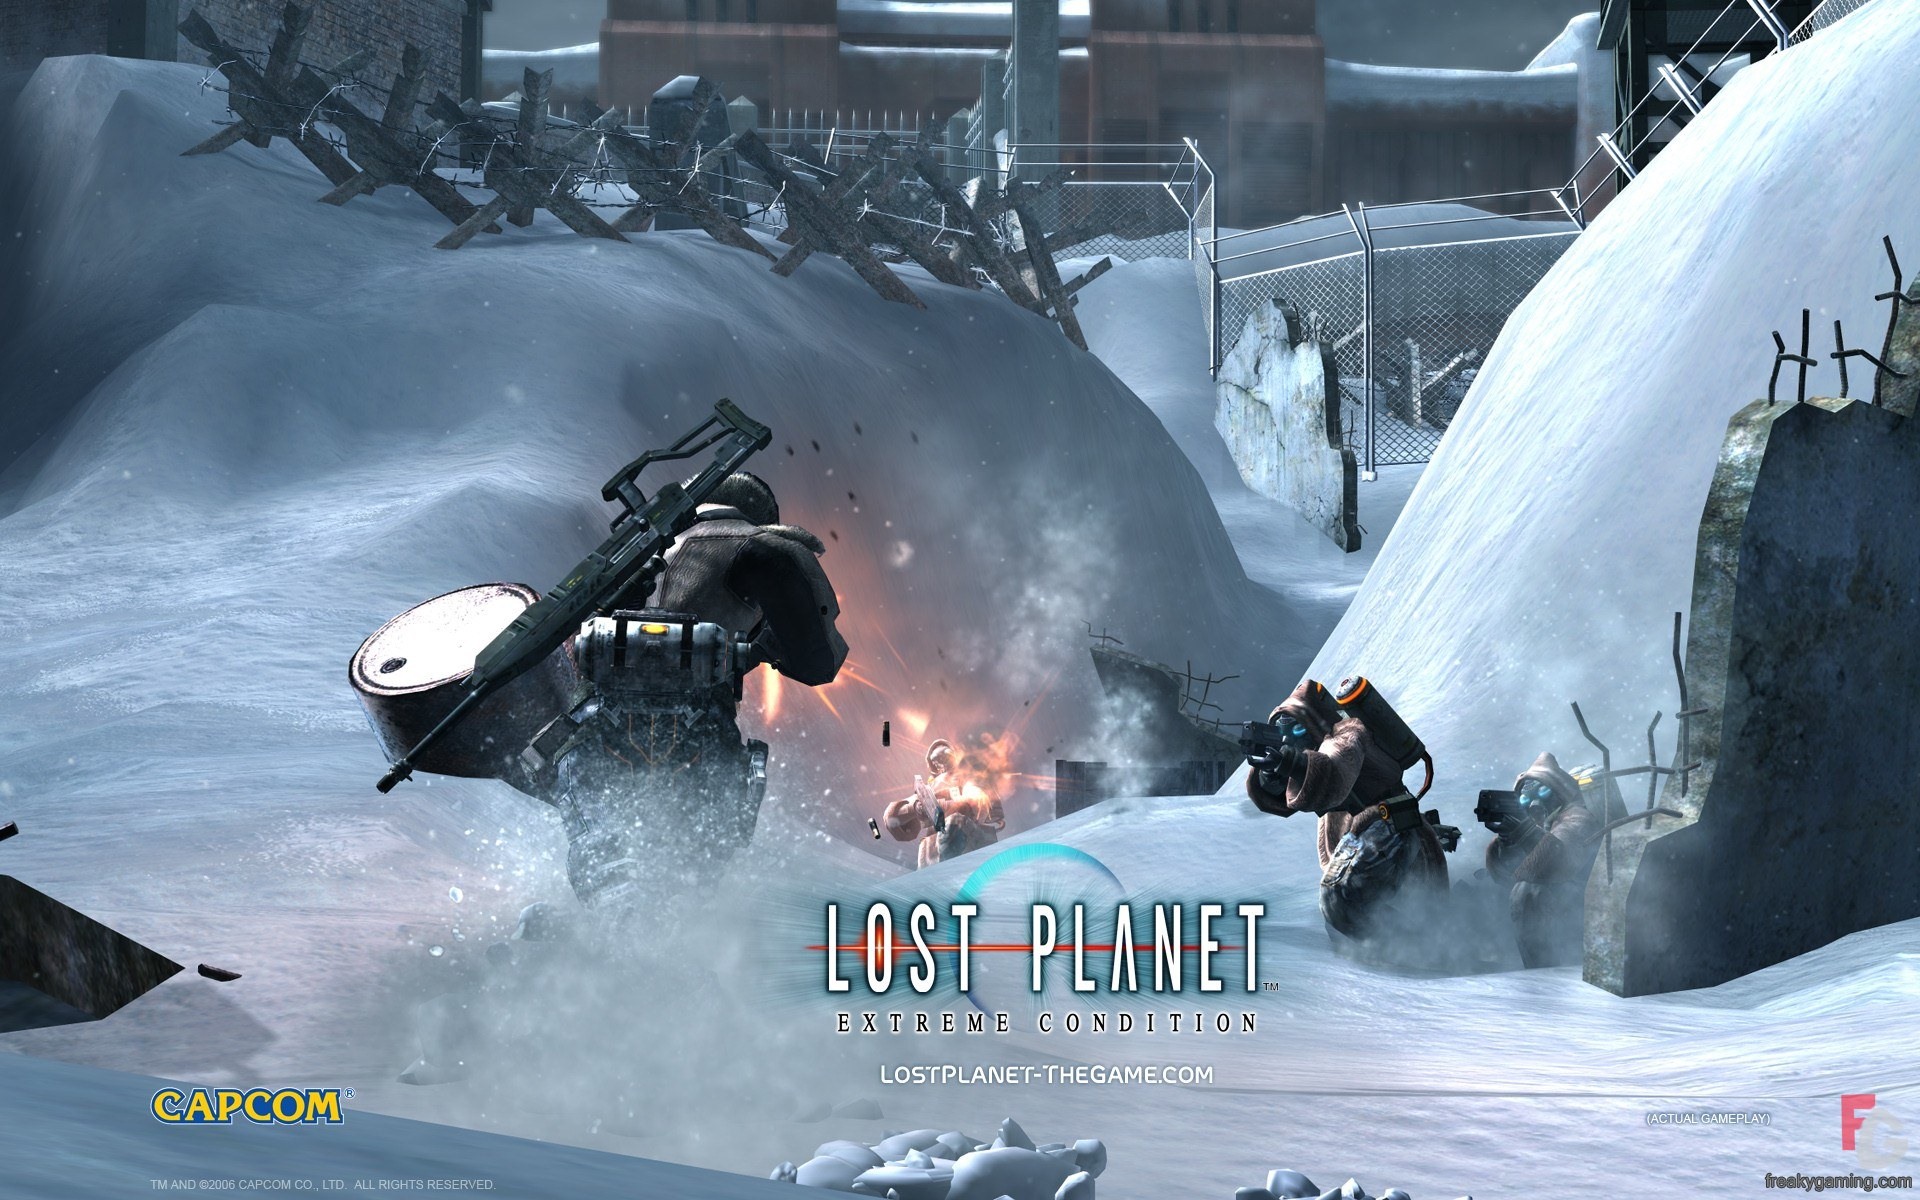 Lost Planet: Extreme Condition HD tapety na plochu #20 - 1920x1200